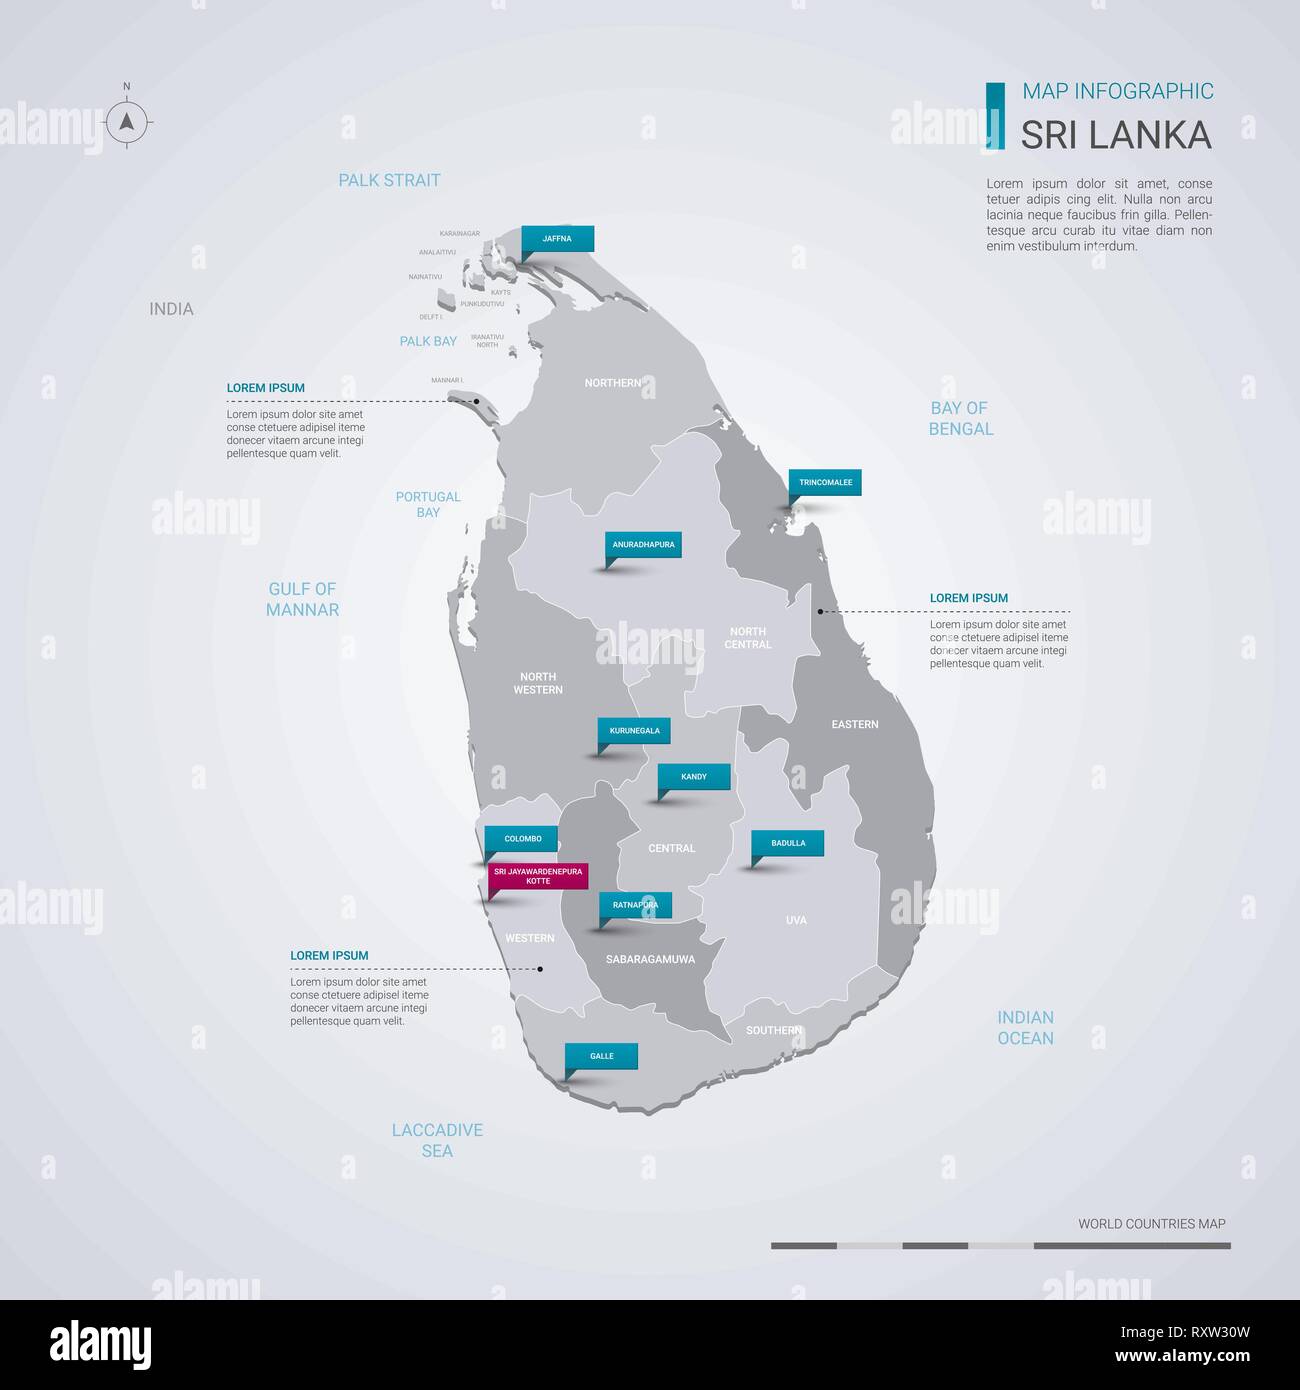 Sri Lanka vector map with infographic elements, pointer marks. Editable template with regions, cities and capital Sri Jayawardenepura Kotte. Stock Vector